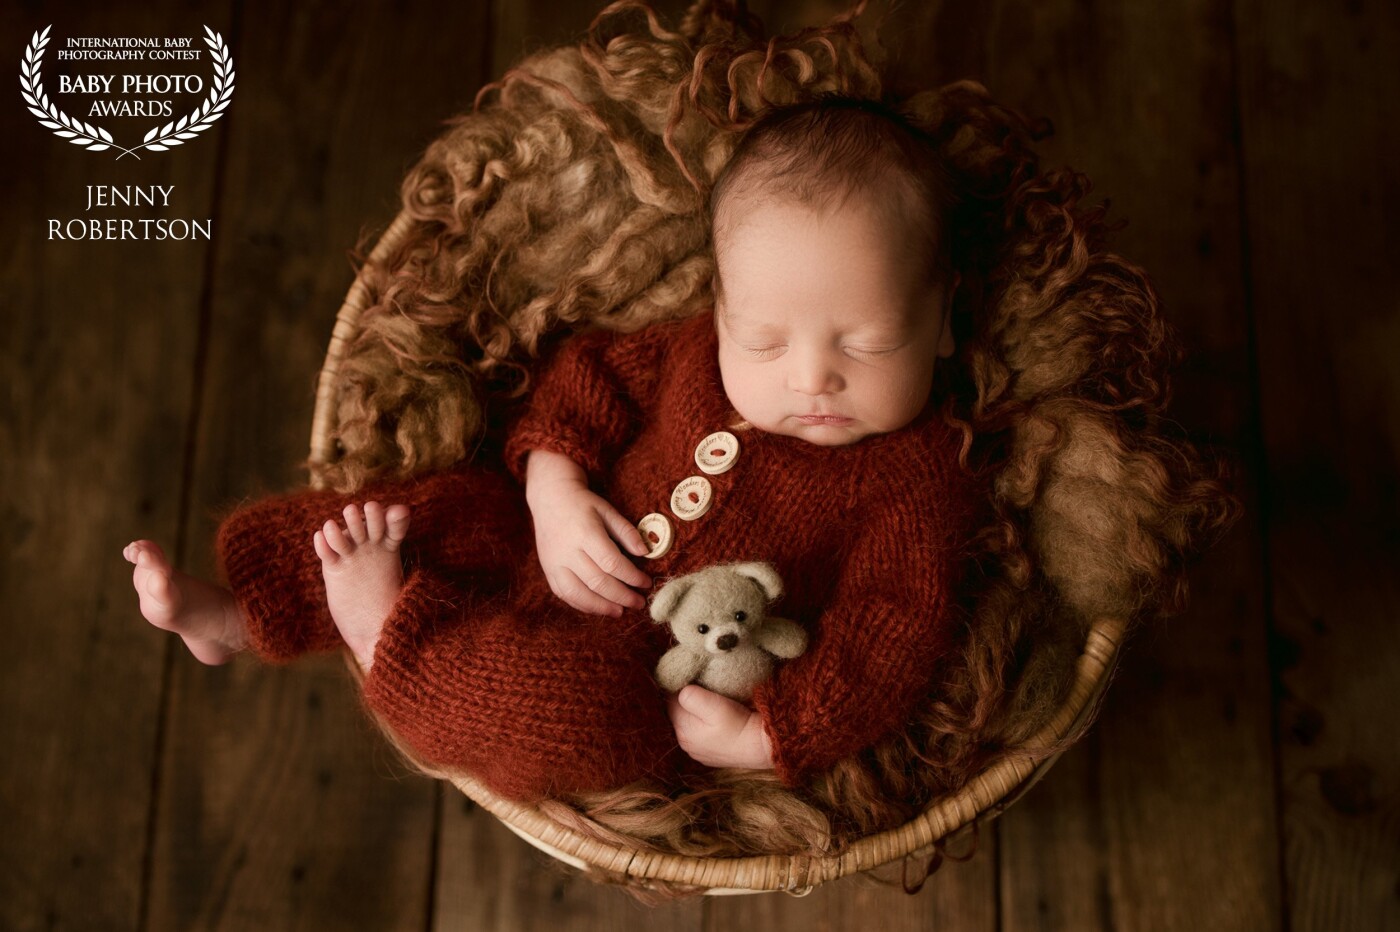 This is adorable little Brantley. I'm not sure how many babies I have photographed over the years but Brantley was one of the most cooperative, sleepiest babies I have ever had. He slept through his entire session and was so fun to photograph.